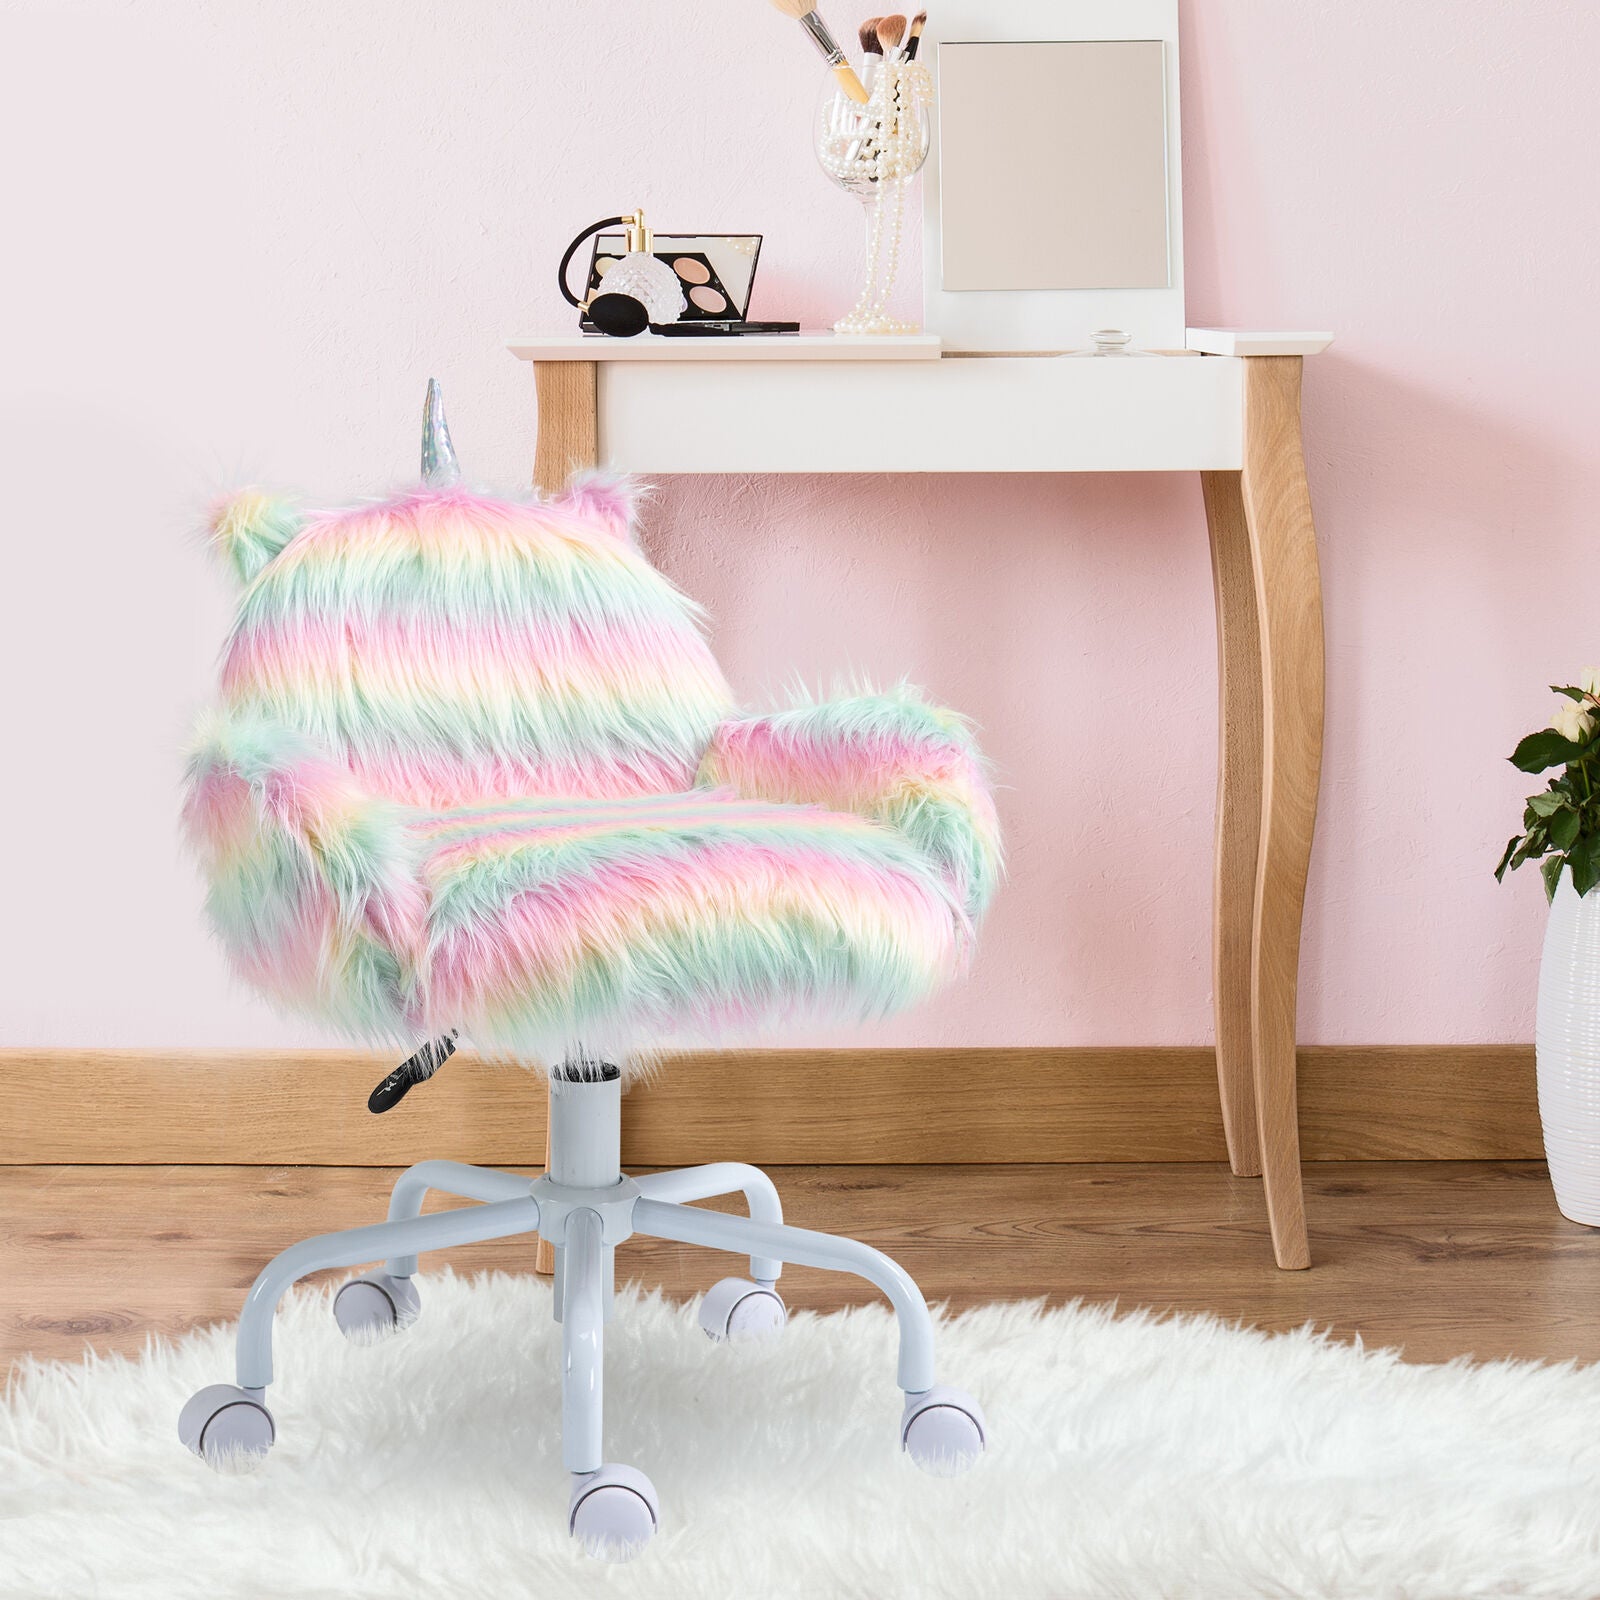 Desk Chair With Soft Cushioned Seat - Unicorn Design Computer Chair